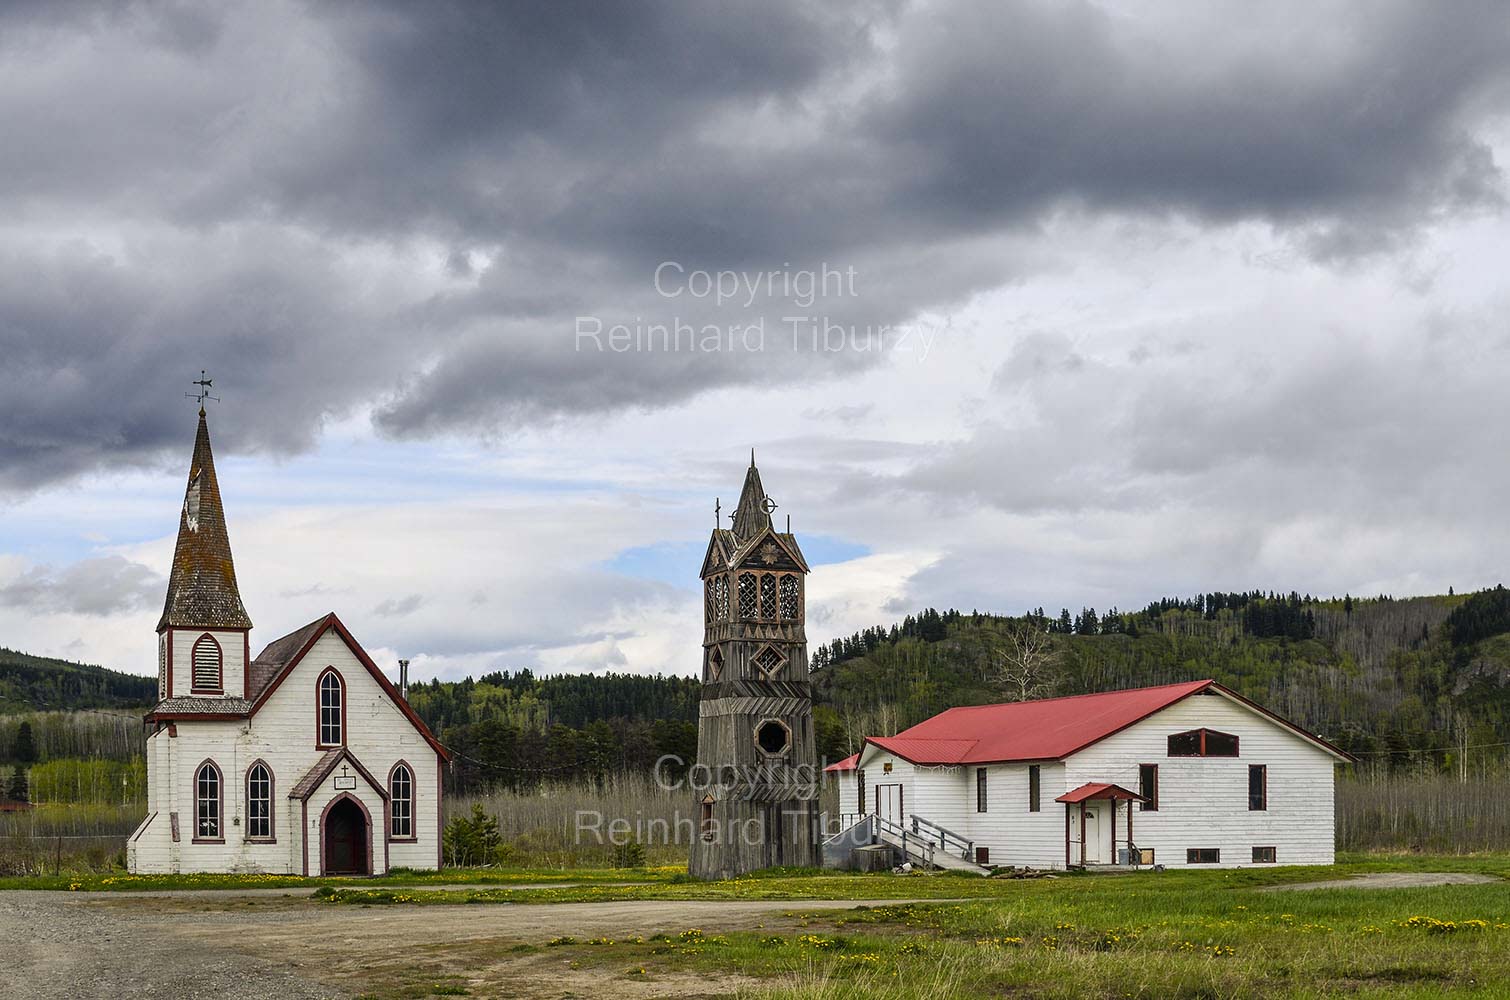 St Pauls Church, Kitwanga at Highway 16, British Columbia, Canada. Old, wooden tower with the original bell of the 1893 bell tower